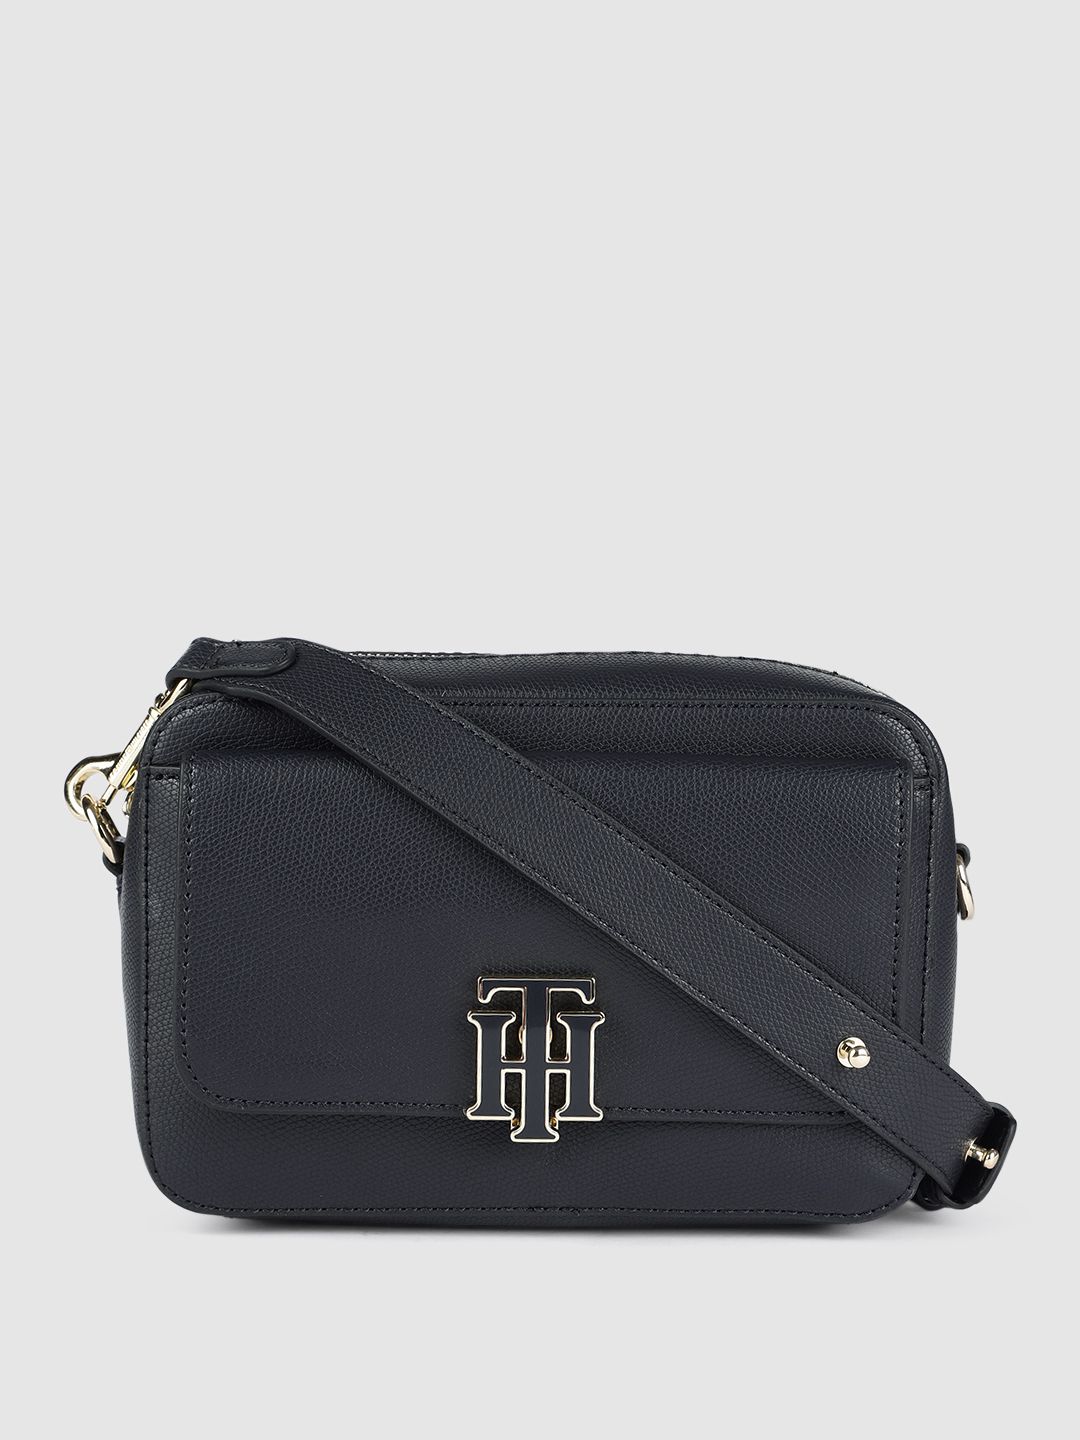 Tommy Hilfiger Navy Blue Textured PU Structured Sling Bag Price in India